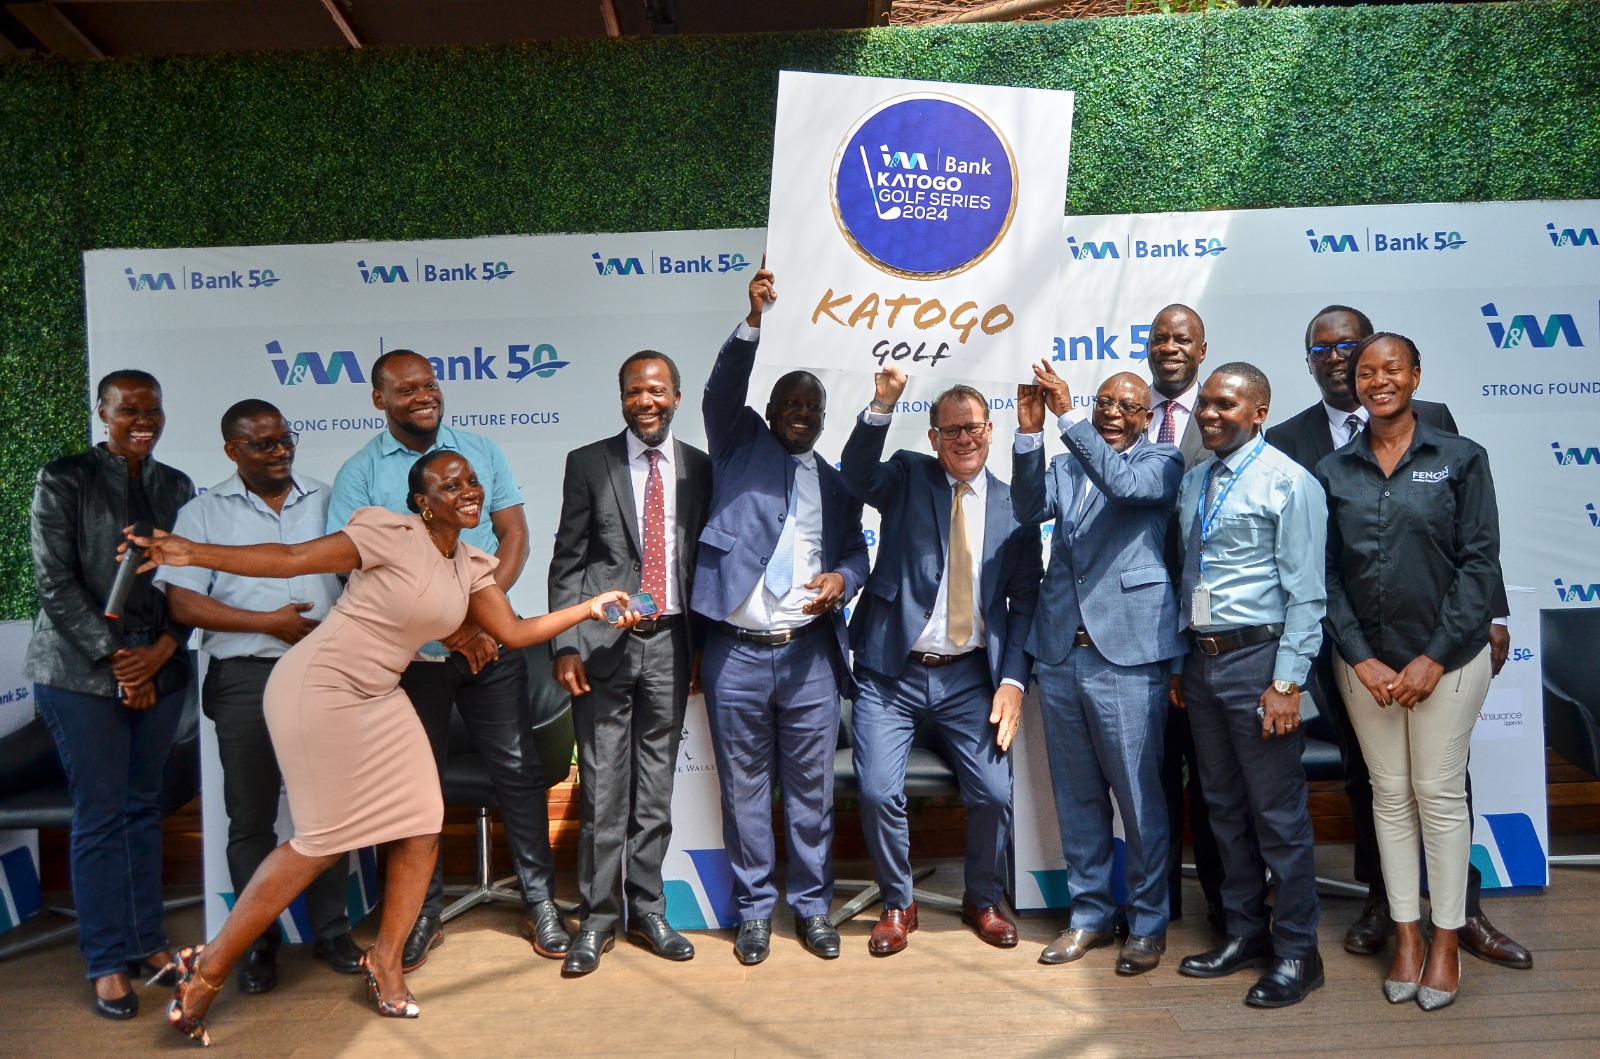 I&M Bank Katogo Golf Series returns with exciting formats of play, gets Uganda Golf Union accreditation